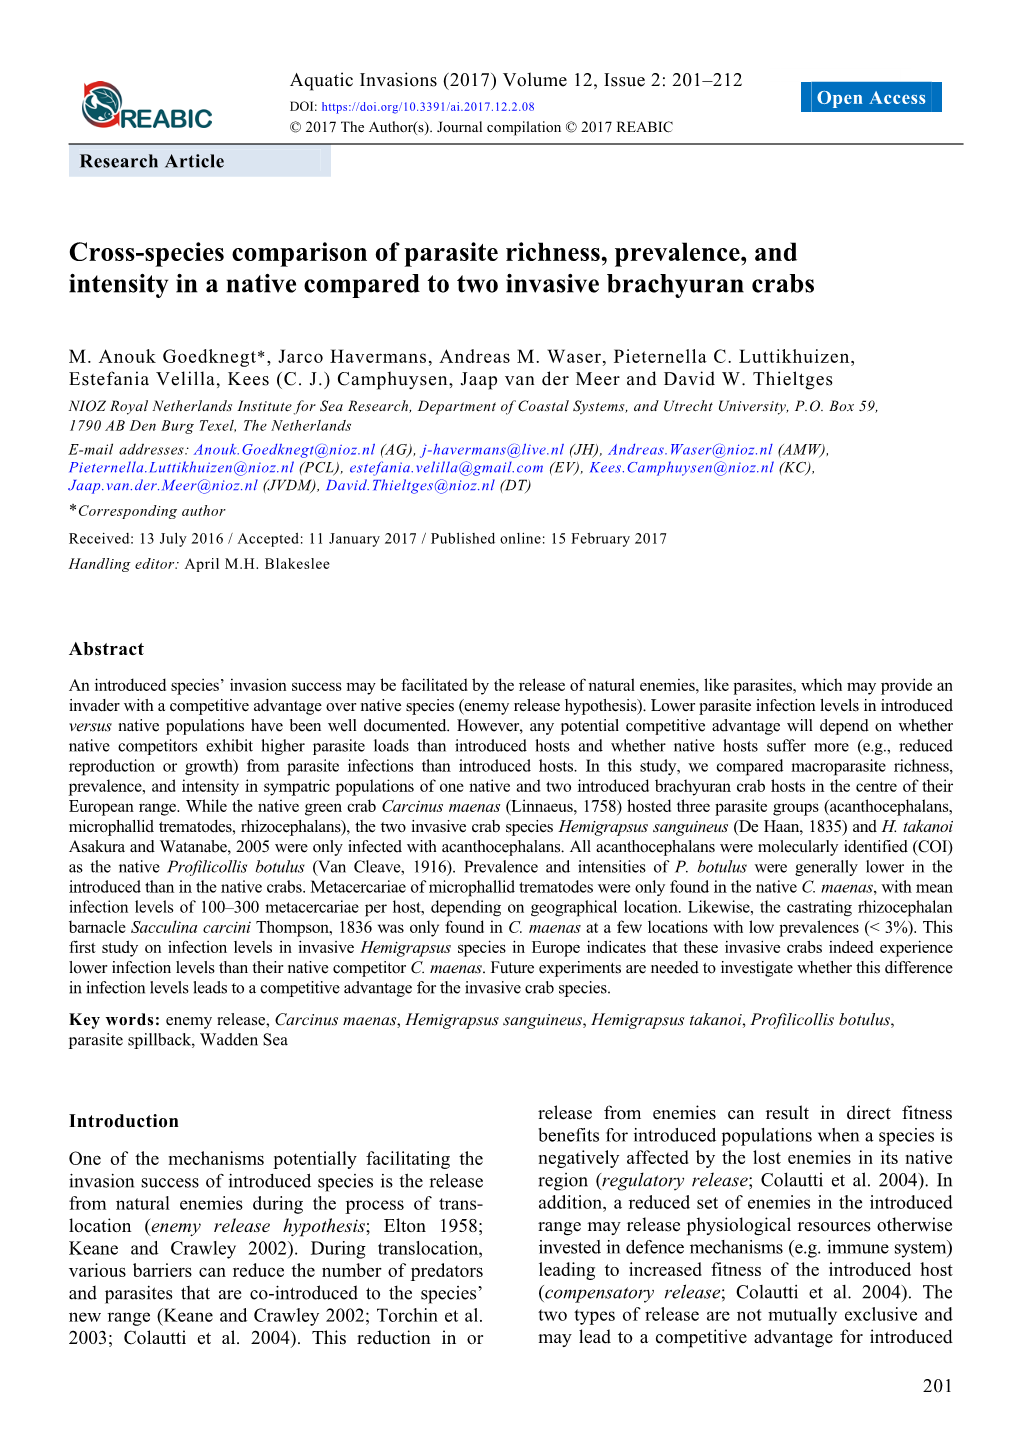 Cross-Species Comparison of Parasite Richness, Prevalence, and Intensity in a Native Compared to Two Invasive Brachyuran Crabs